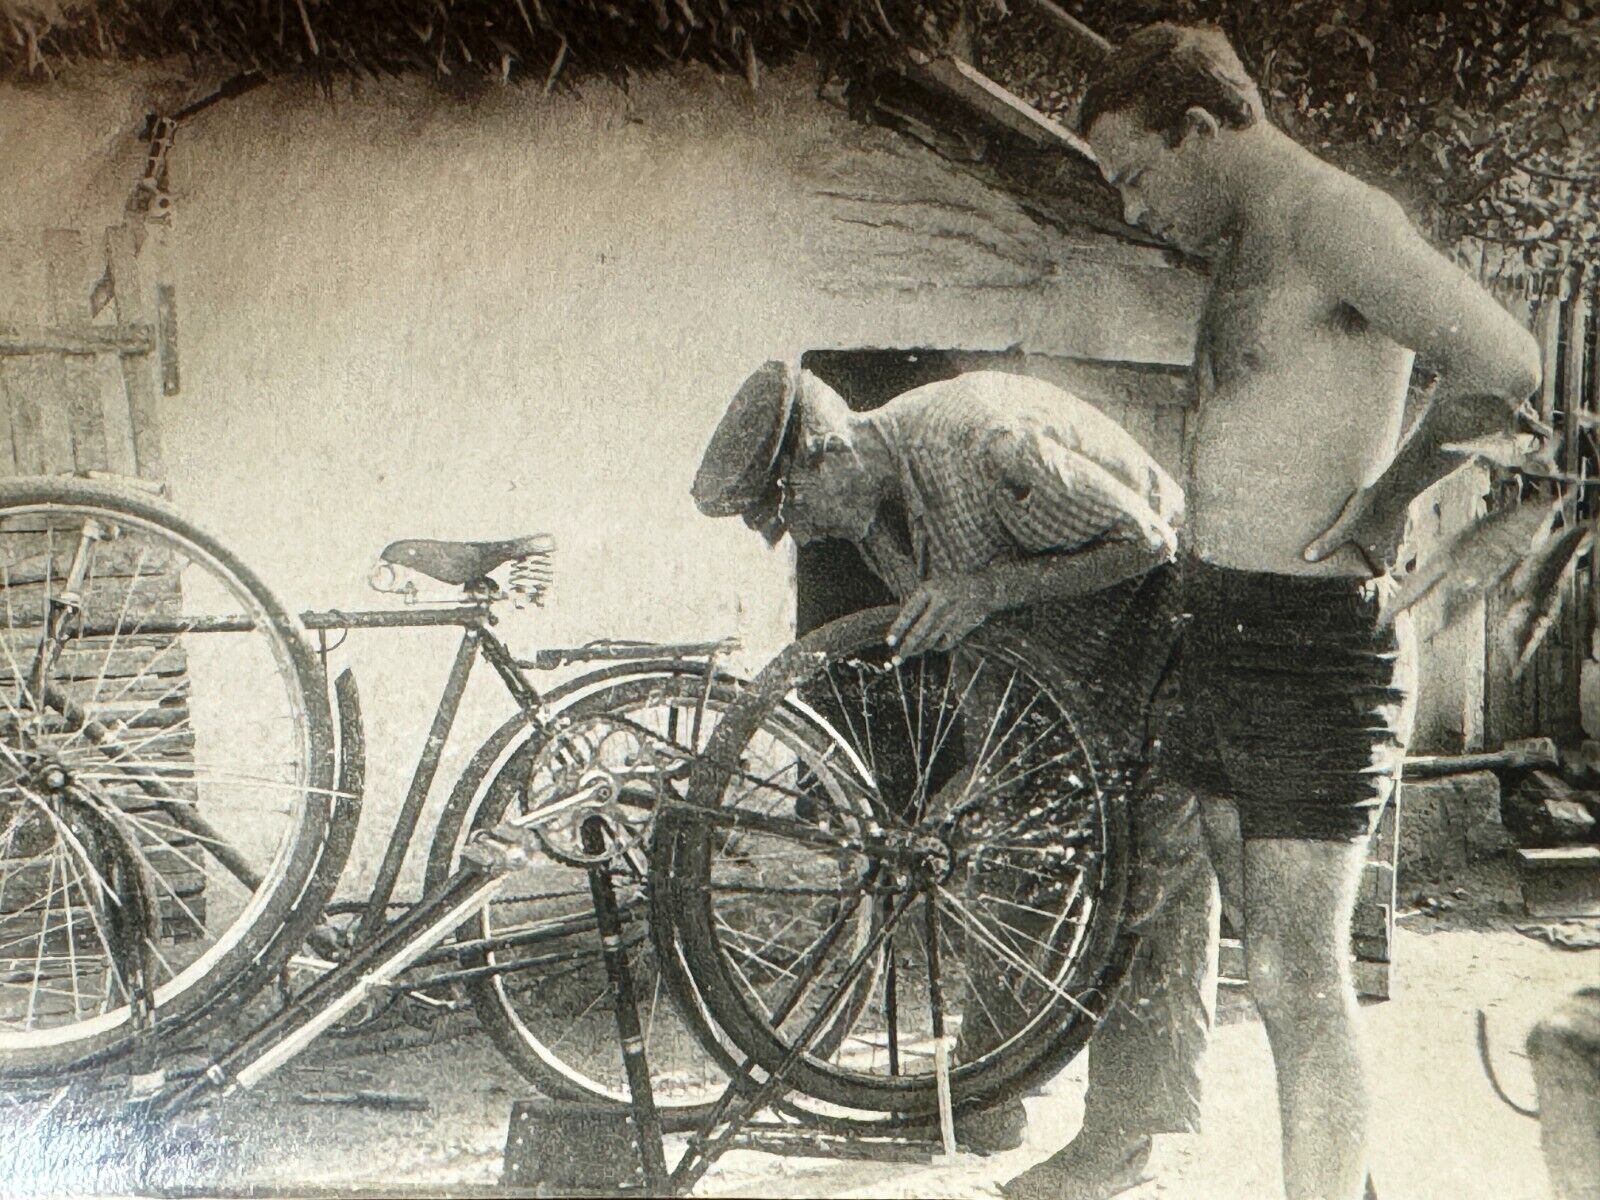 1950s Bicycles Two Men Very Handsome Shirtless Guys Bicycle Repair Vintage Photo